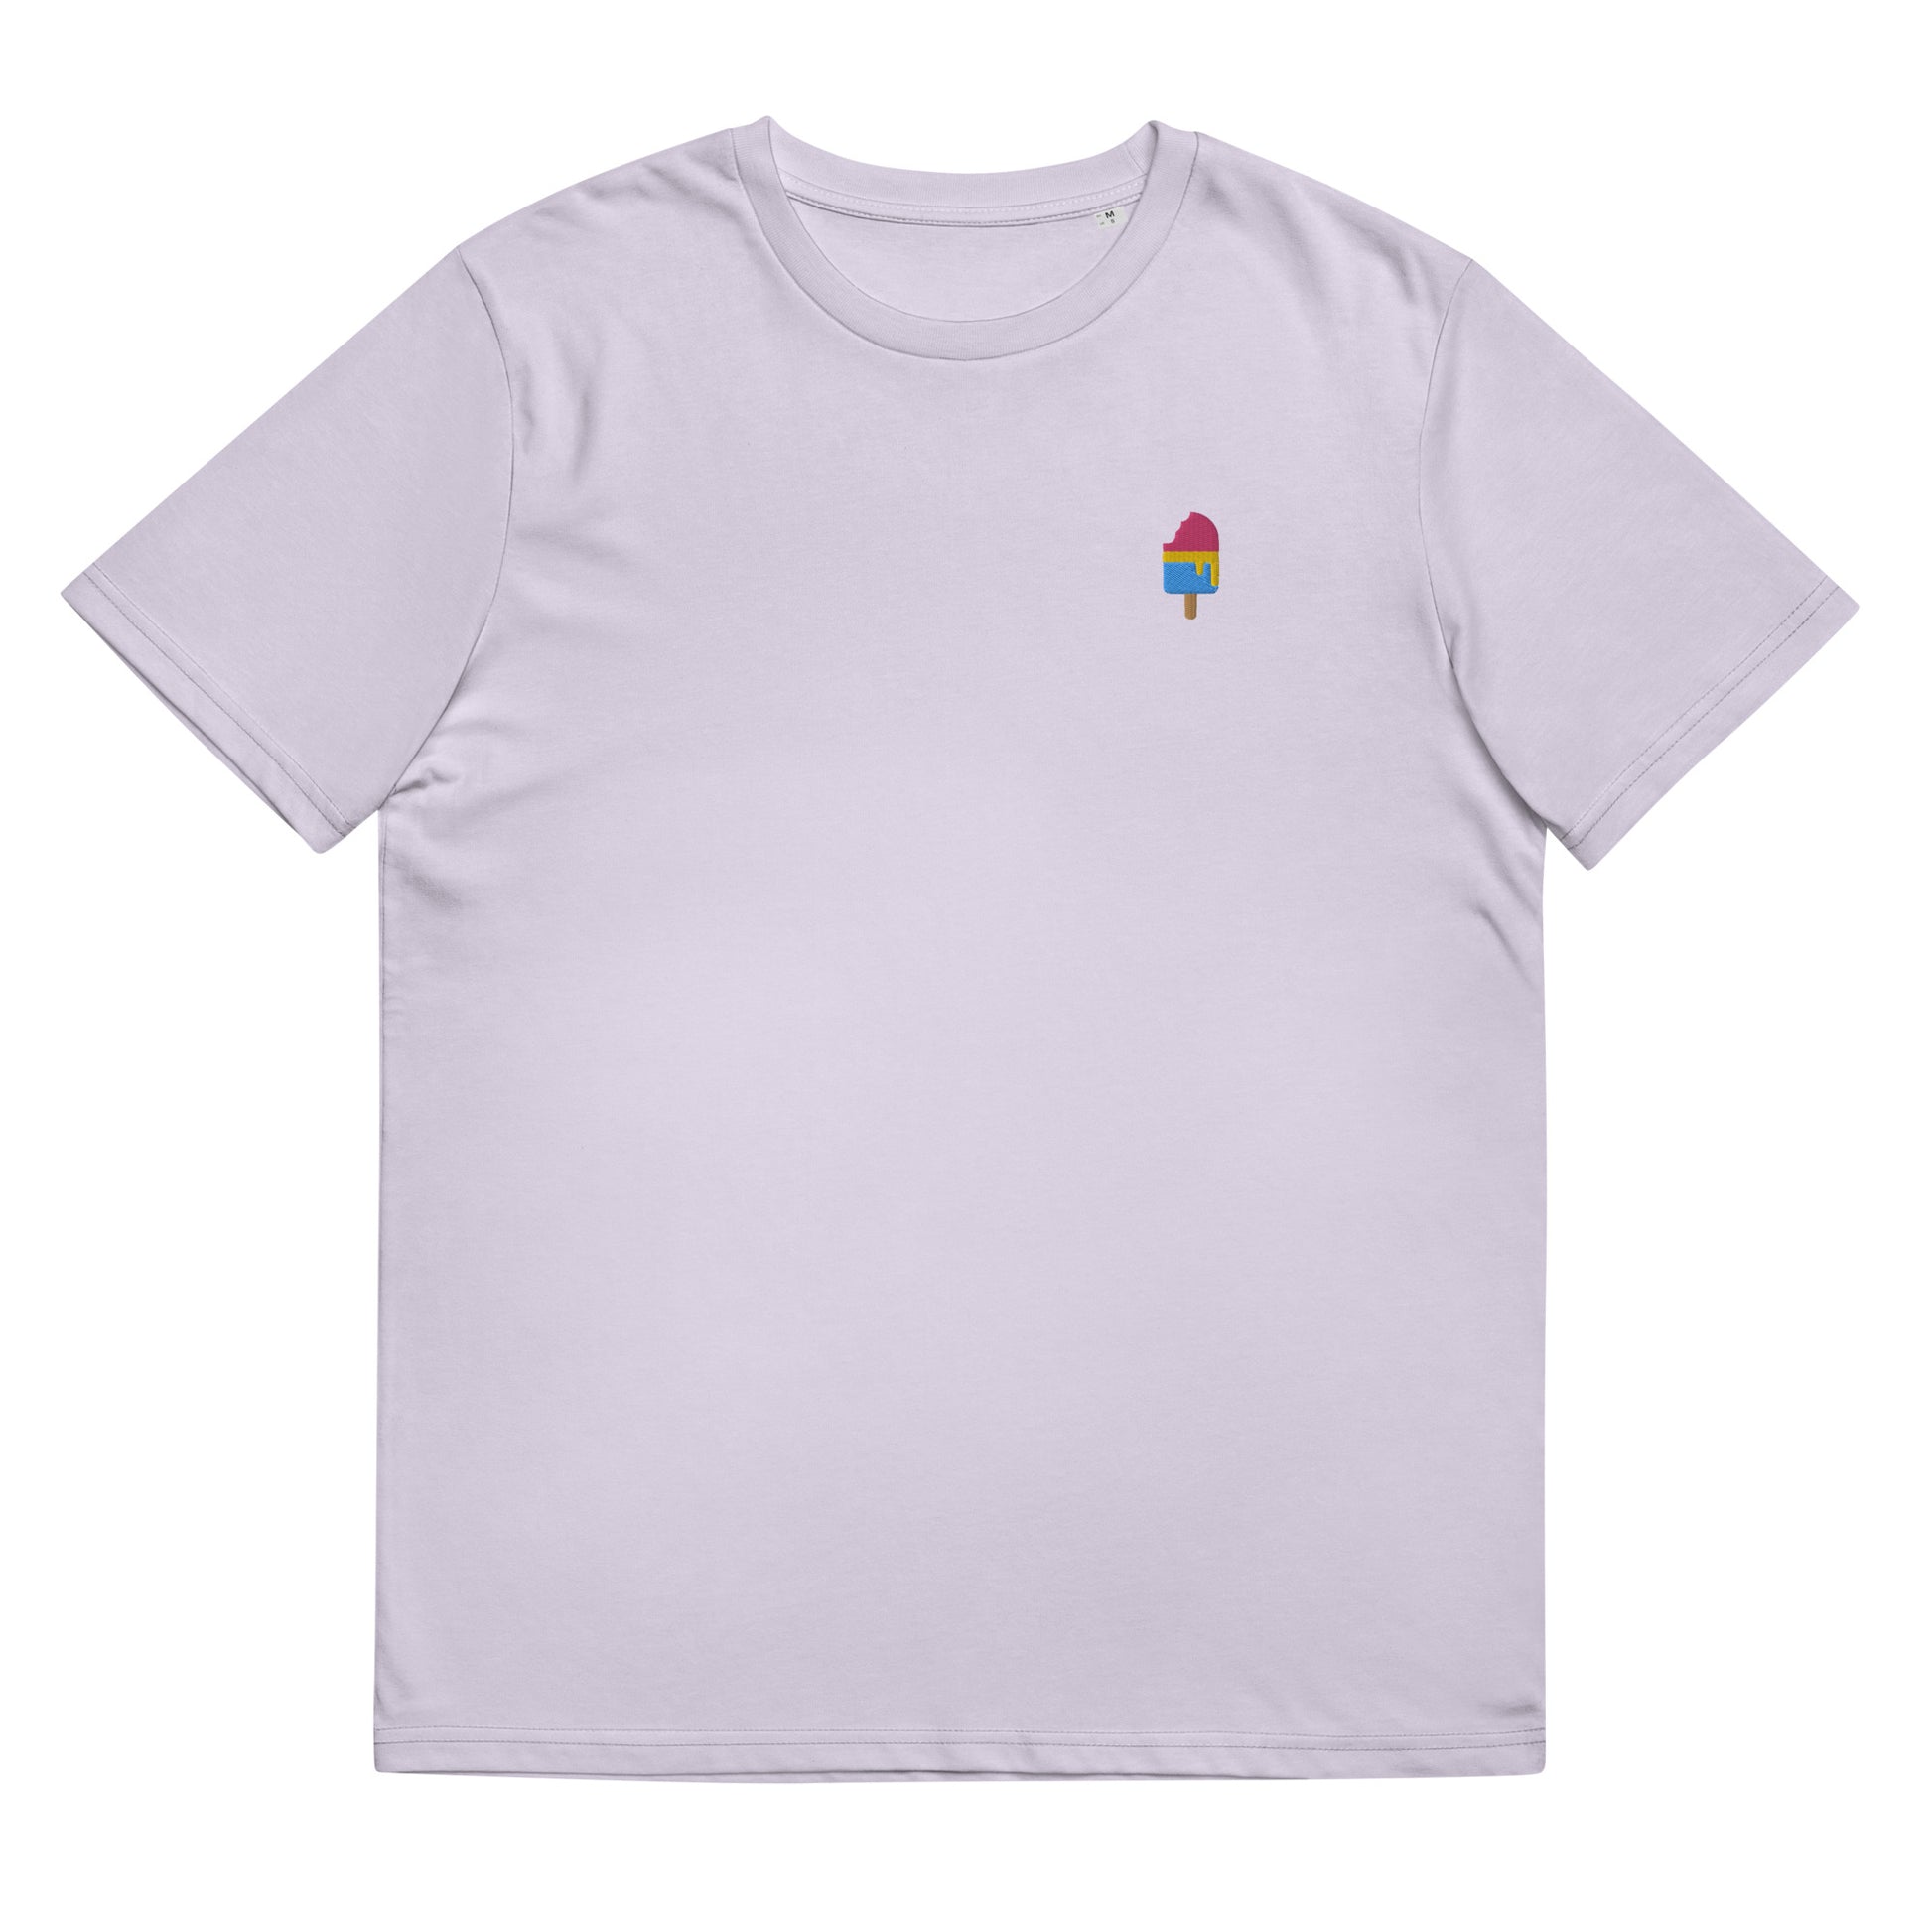 Fitted lavender organic cotton t-shirt with a small embroidered ice cream in pansexual colors on the left chest. Available in sizes S to 3XL.